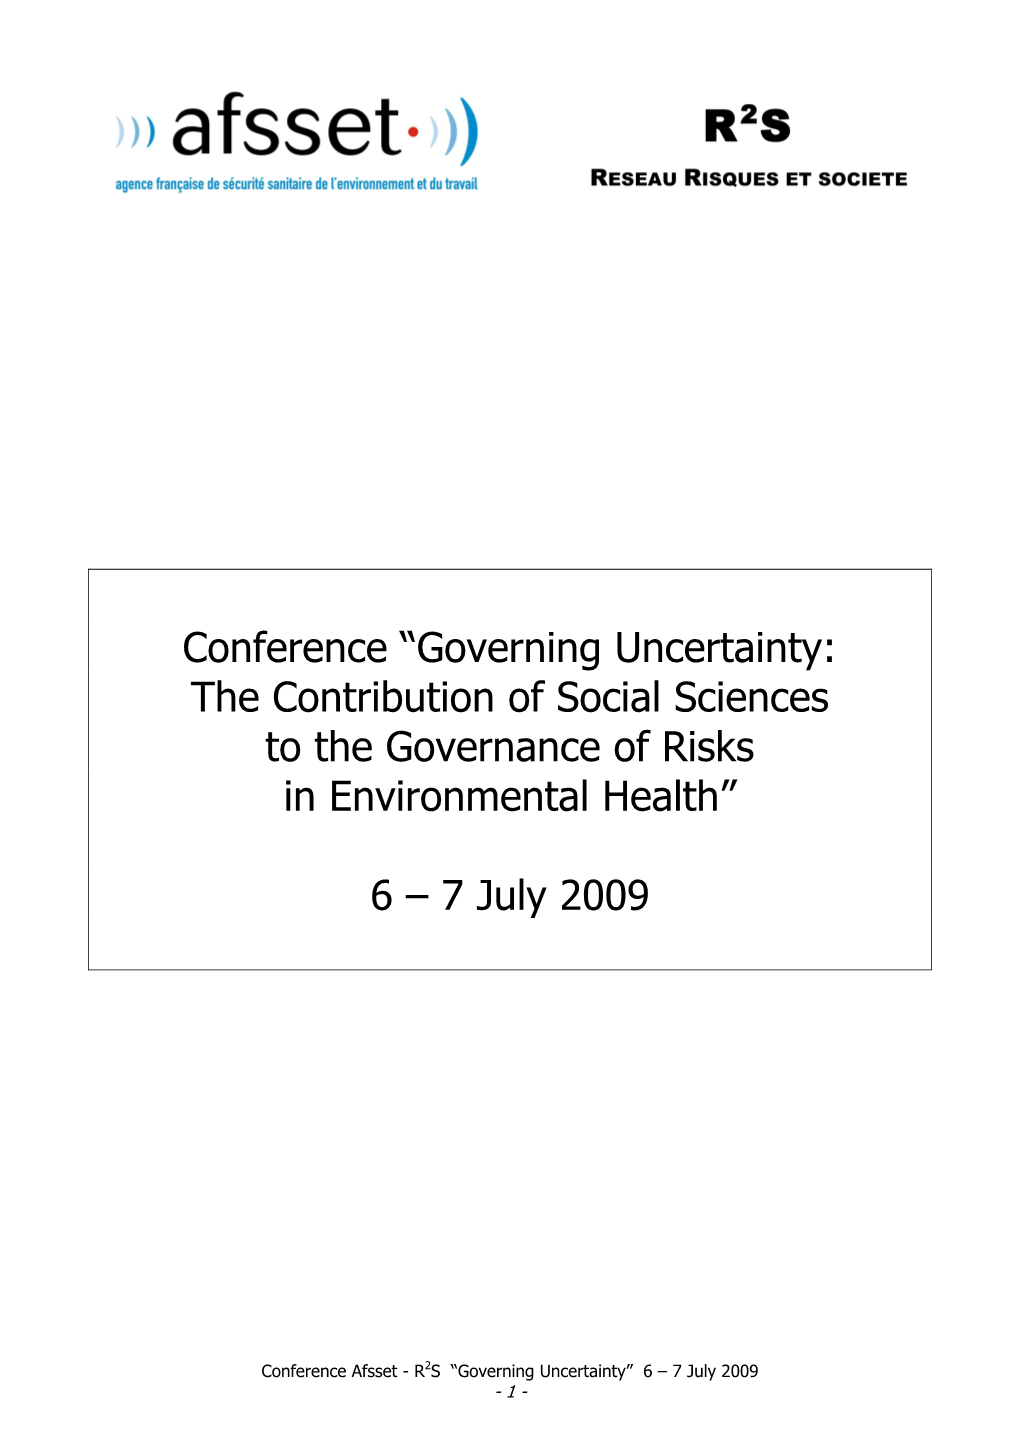 Governing Uncertainty: the Contribution of Social Sciences to the Governance of Risks in Environmental Health”